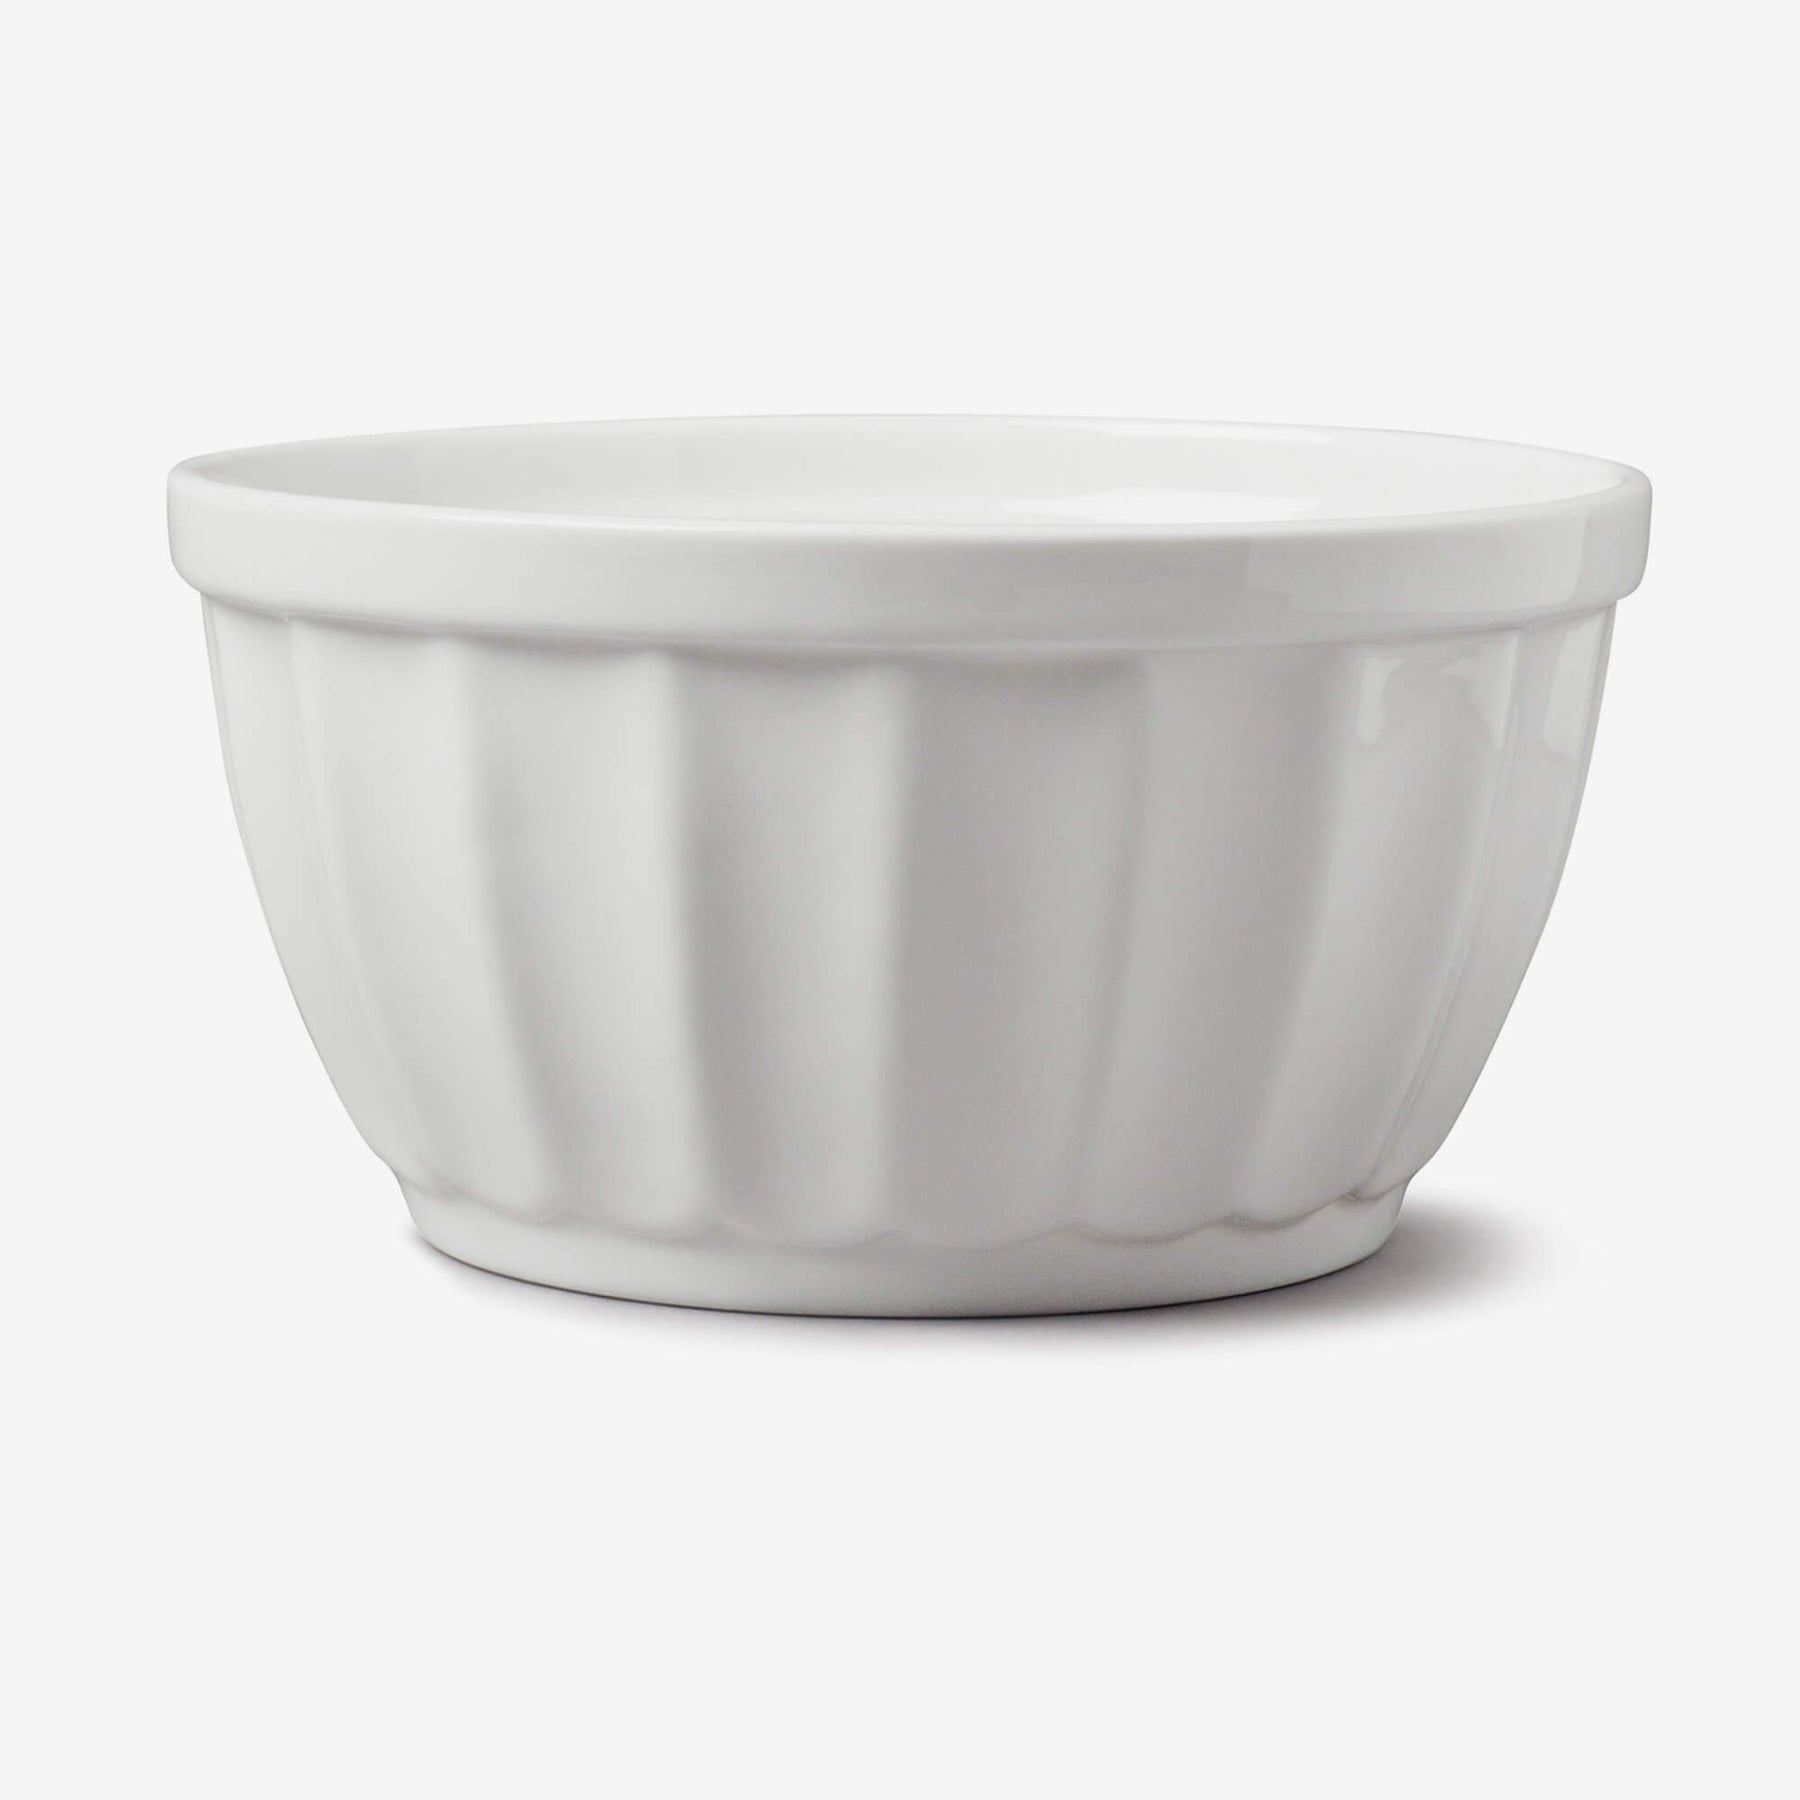 Porcelain Fluted Bowl, Available in 2 Sizes